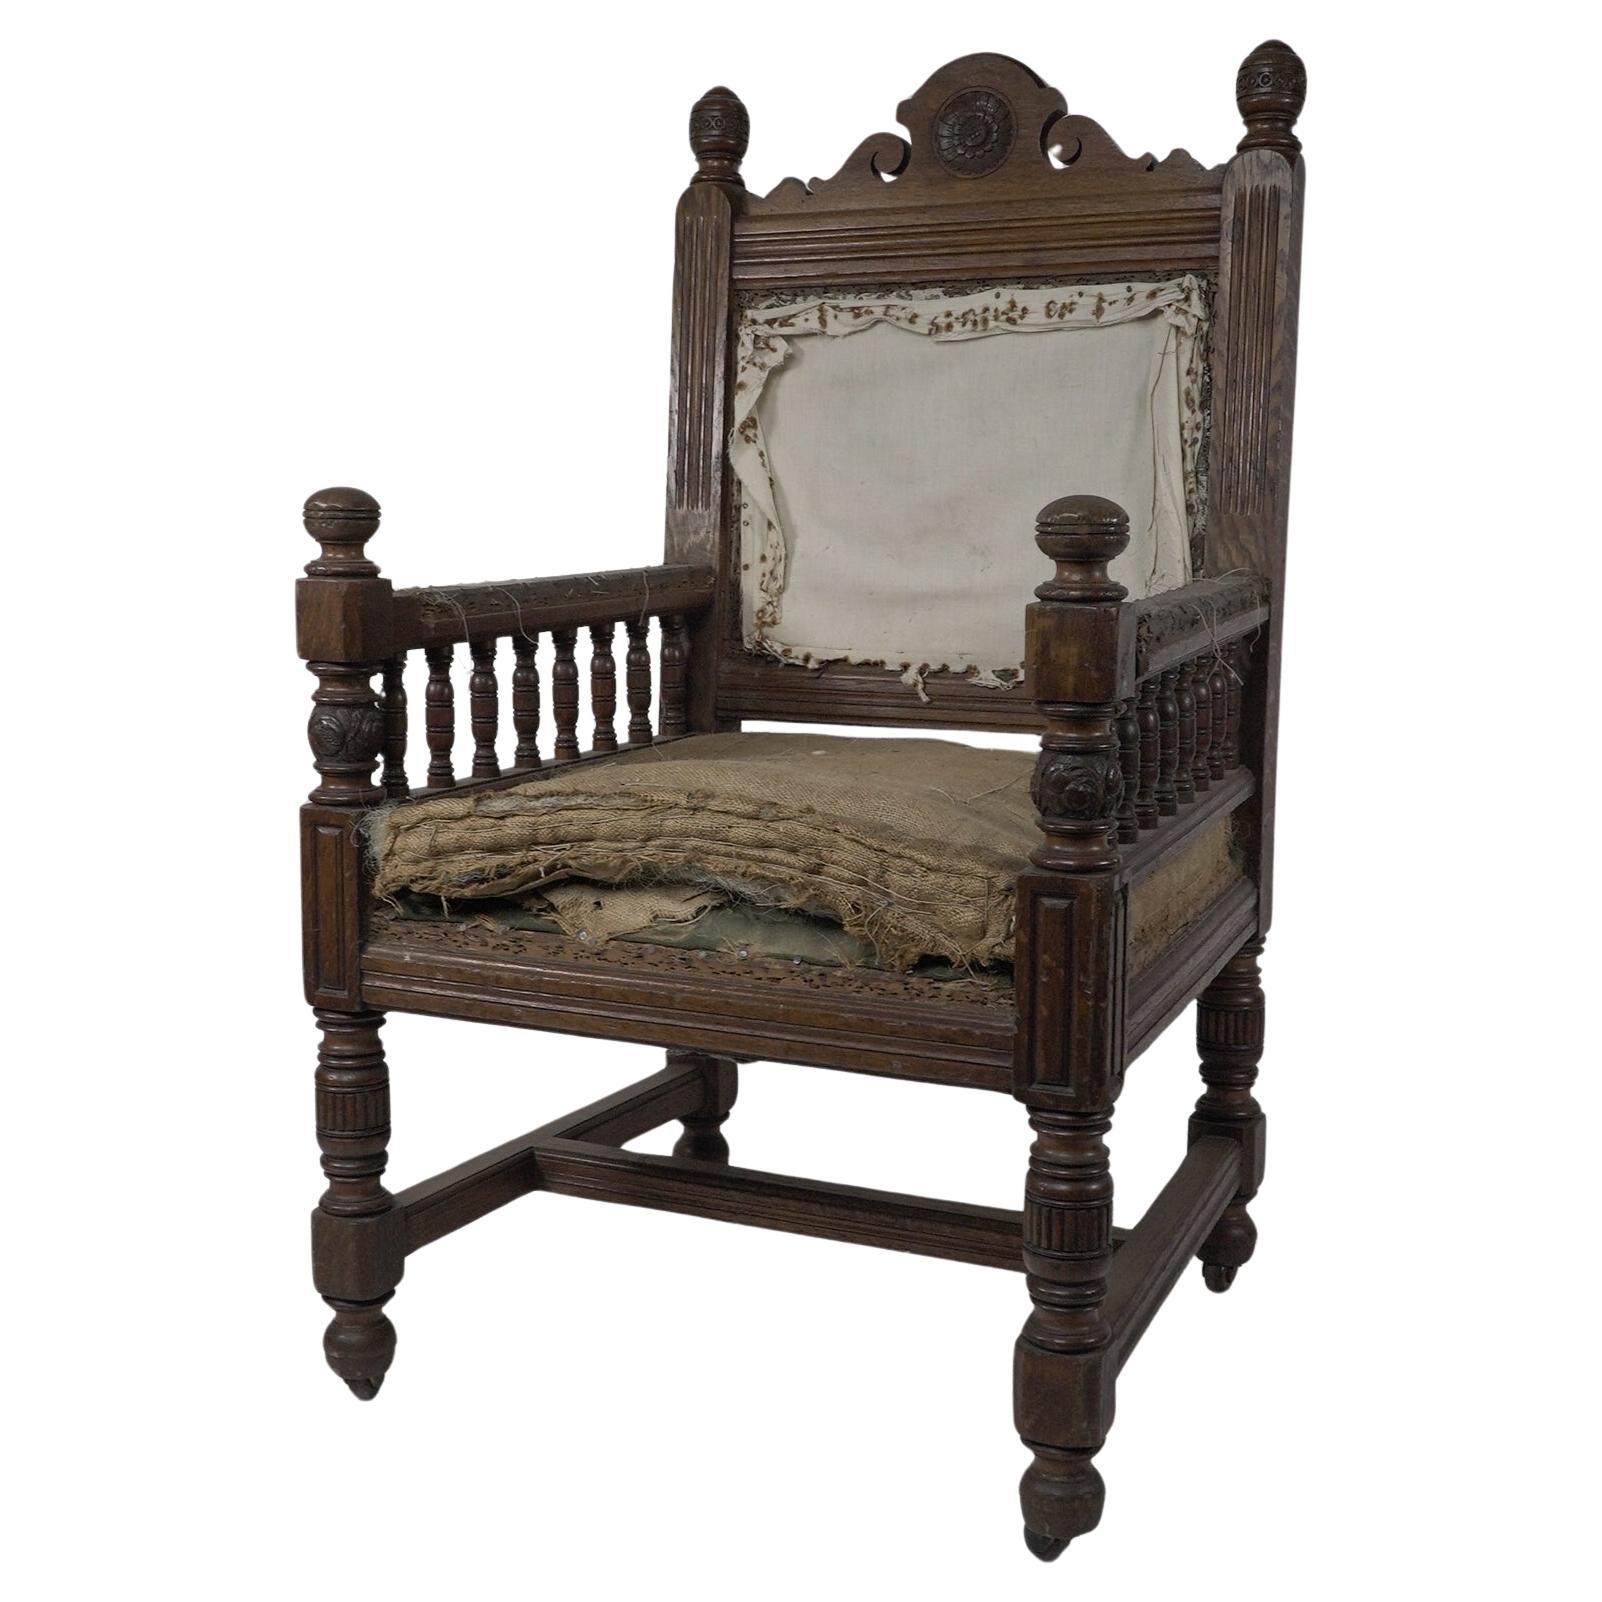 Bruce Talbert attributed probably made by Gillows. A Gothic Revival oak armchair For Sale